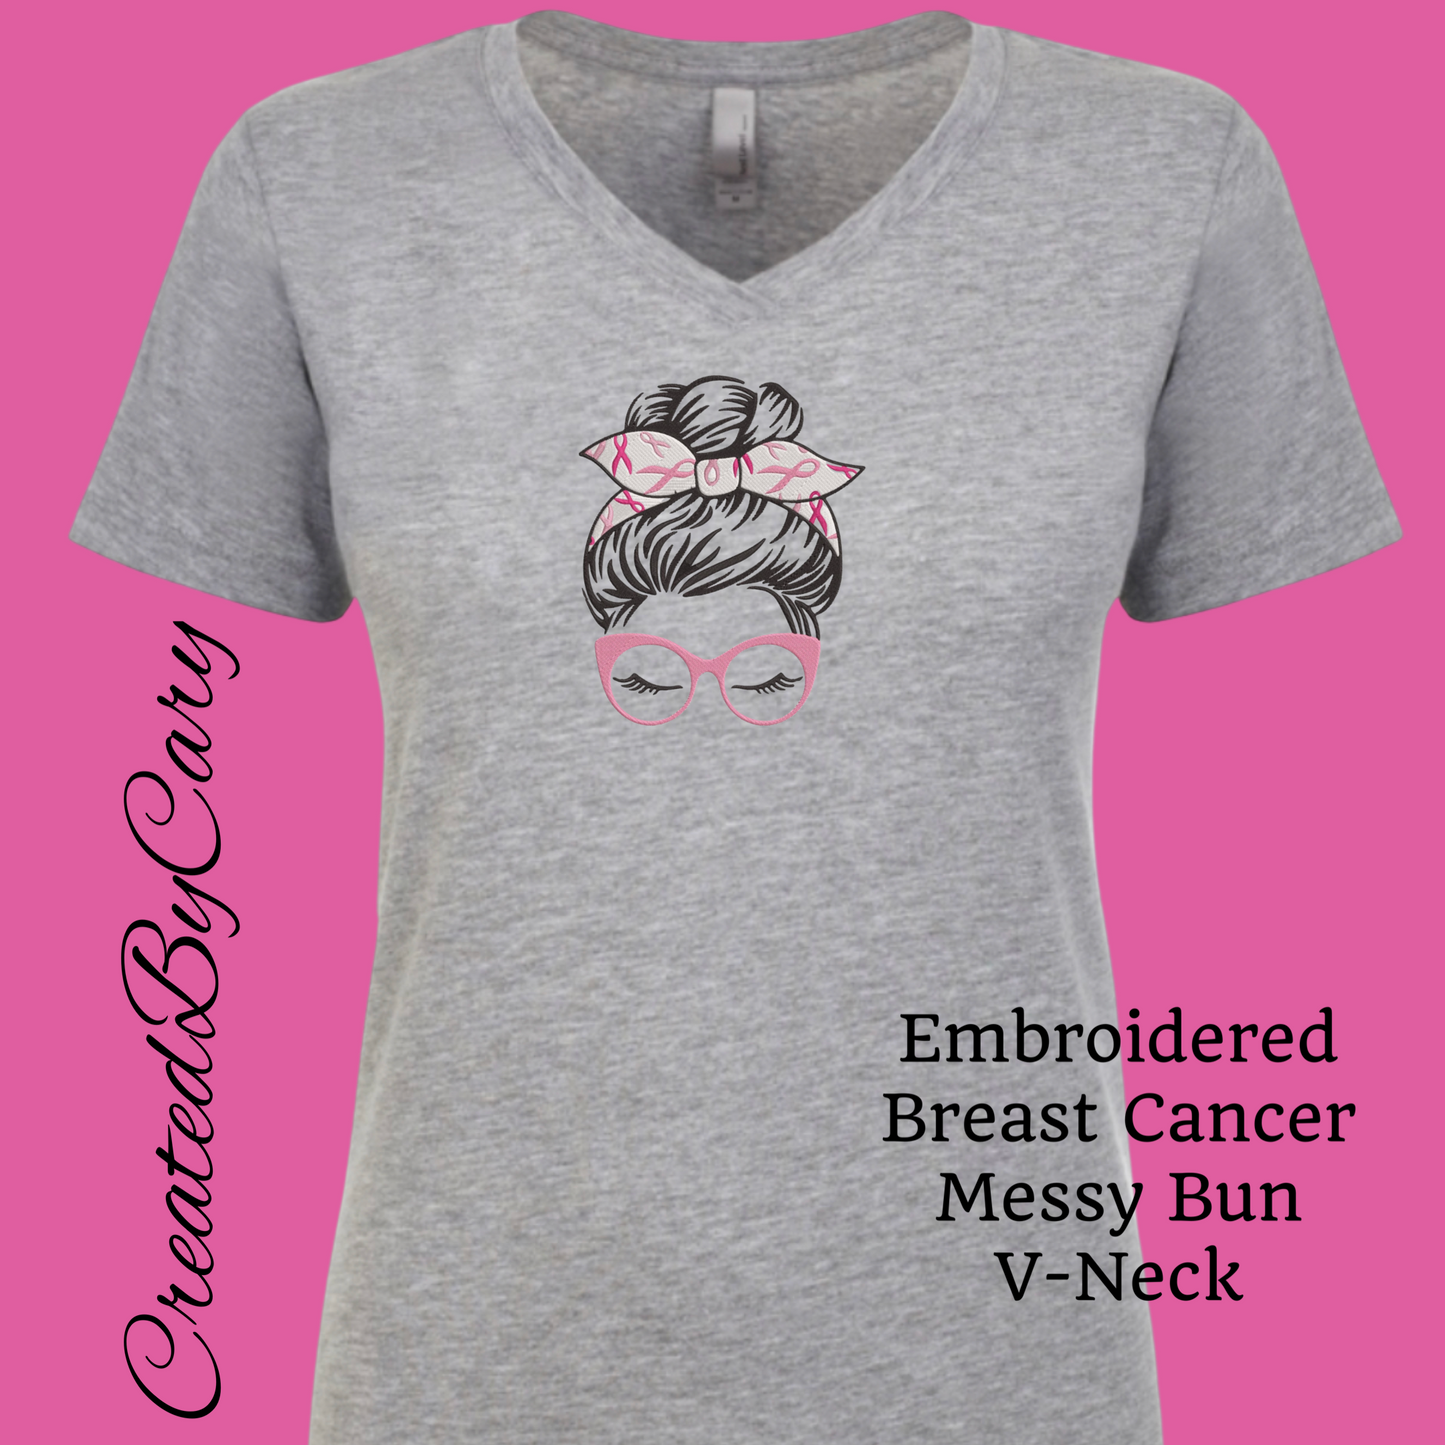 Breast Cancer Embroidered Messy Bun Shirt/Muscle Tank